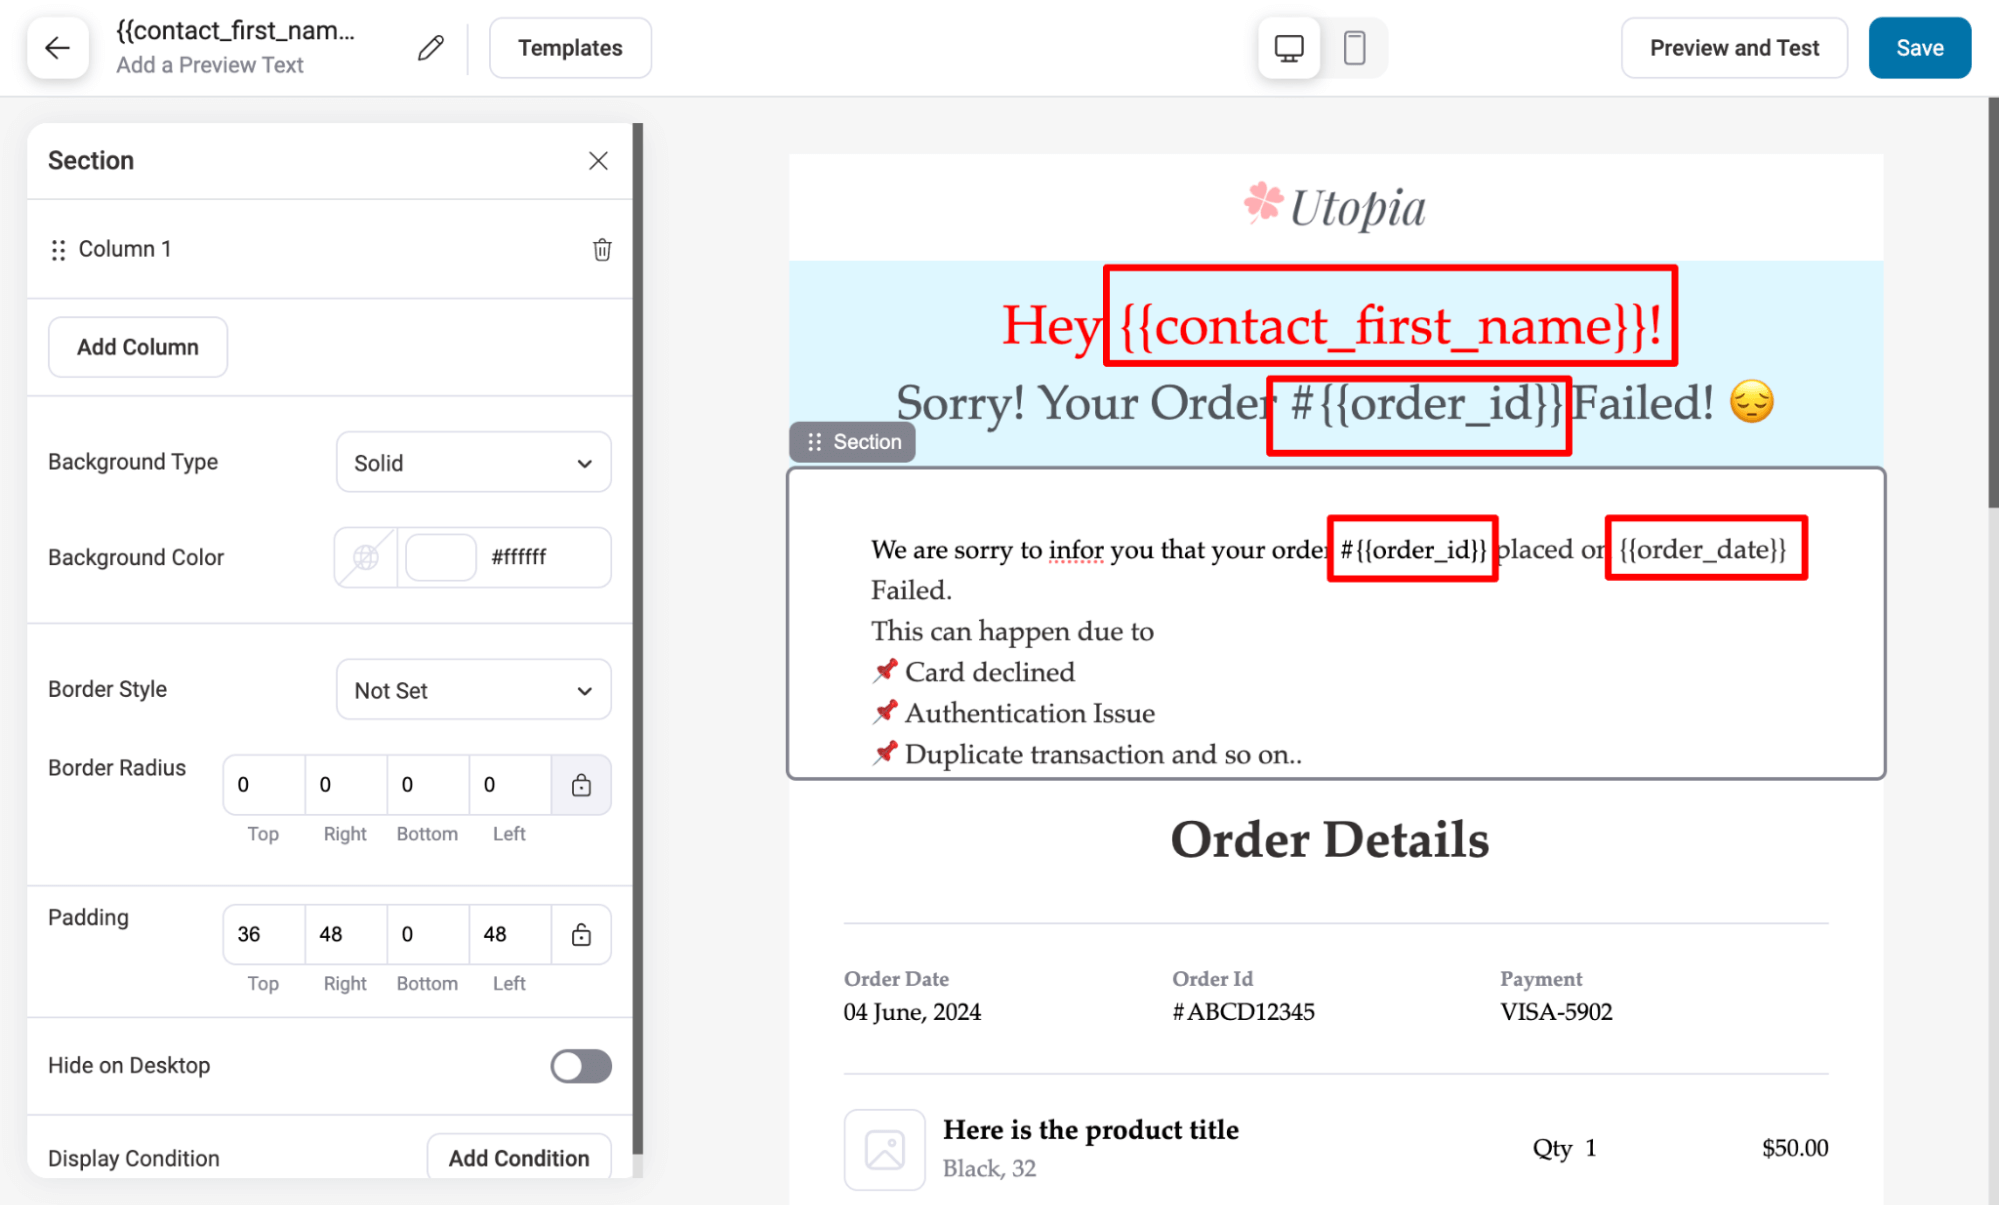 add merge tag on failed order email to personalzie it